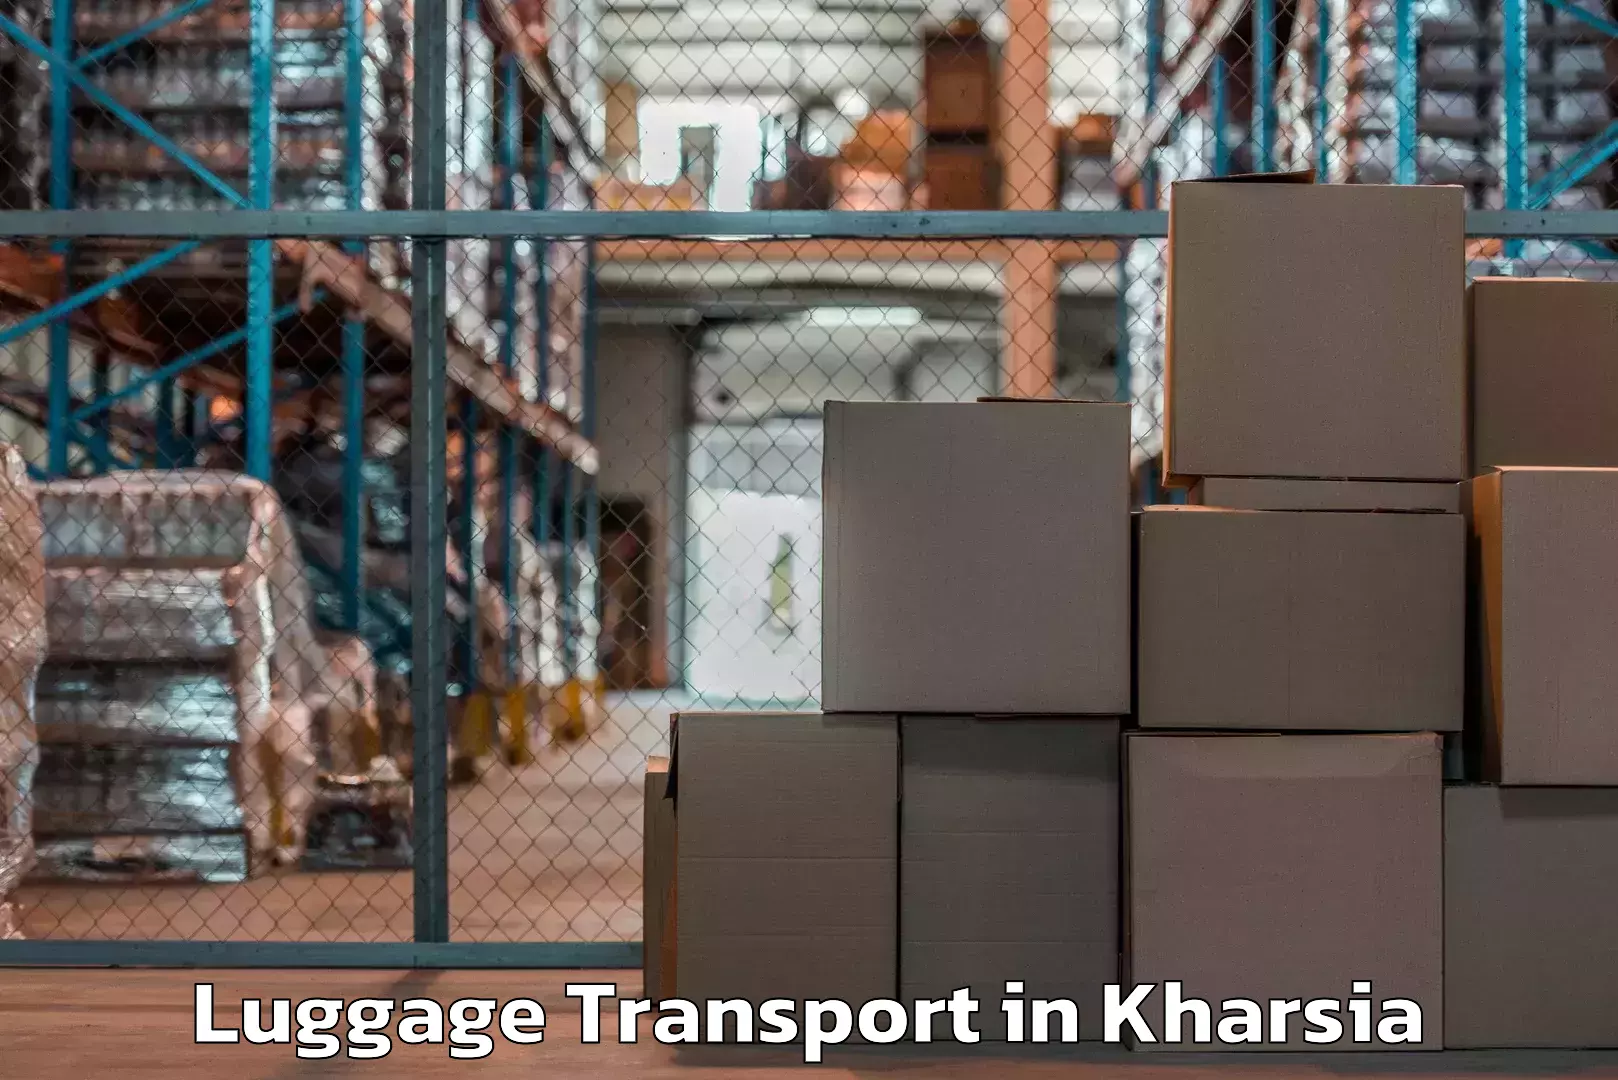 Luggage shipping trends in Kharsia